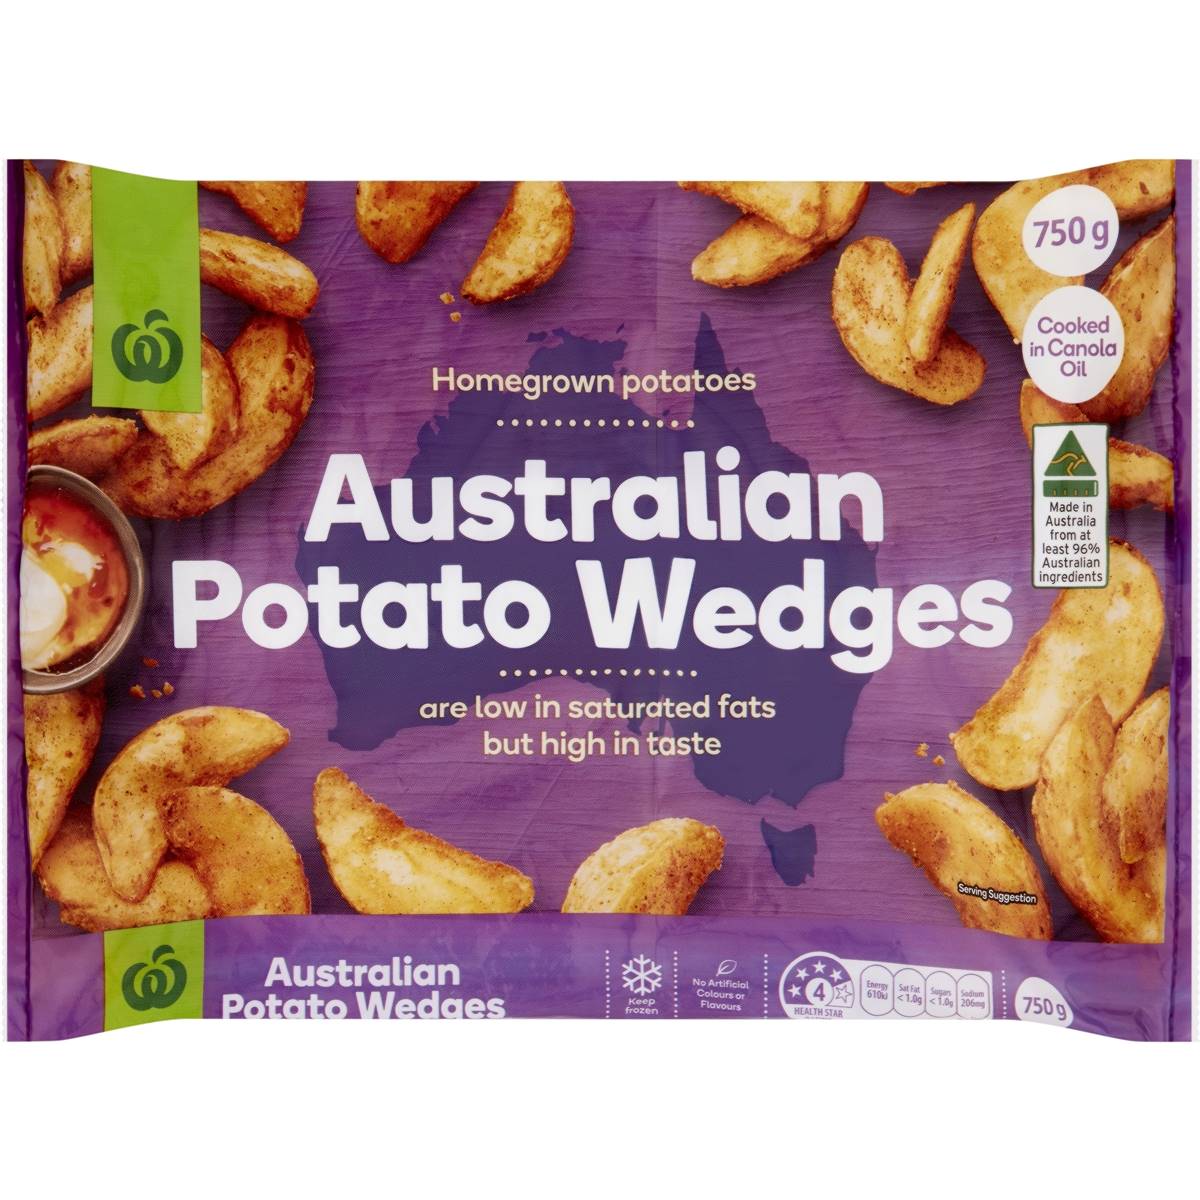 Calories in Woolworths Potato Wedges